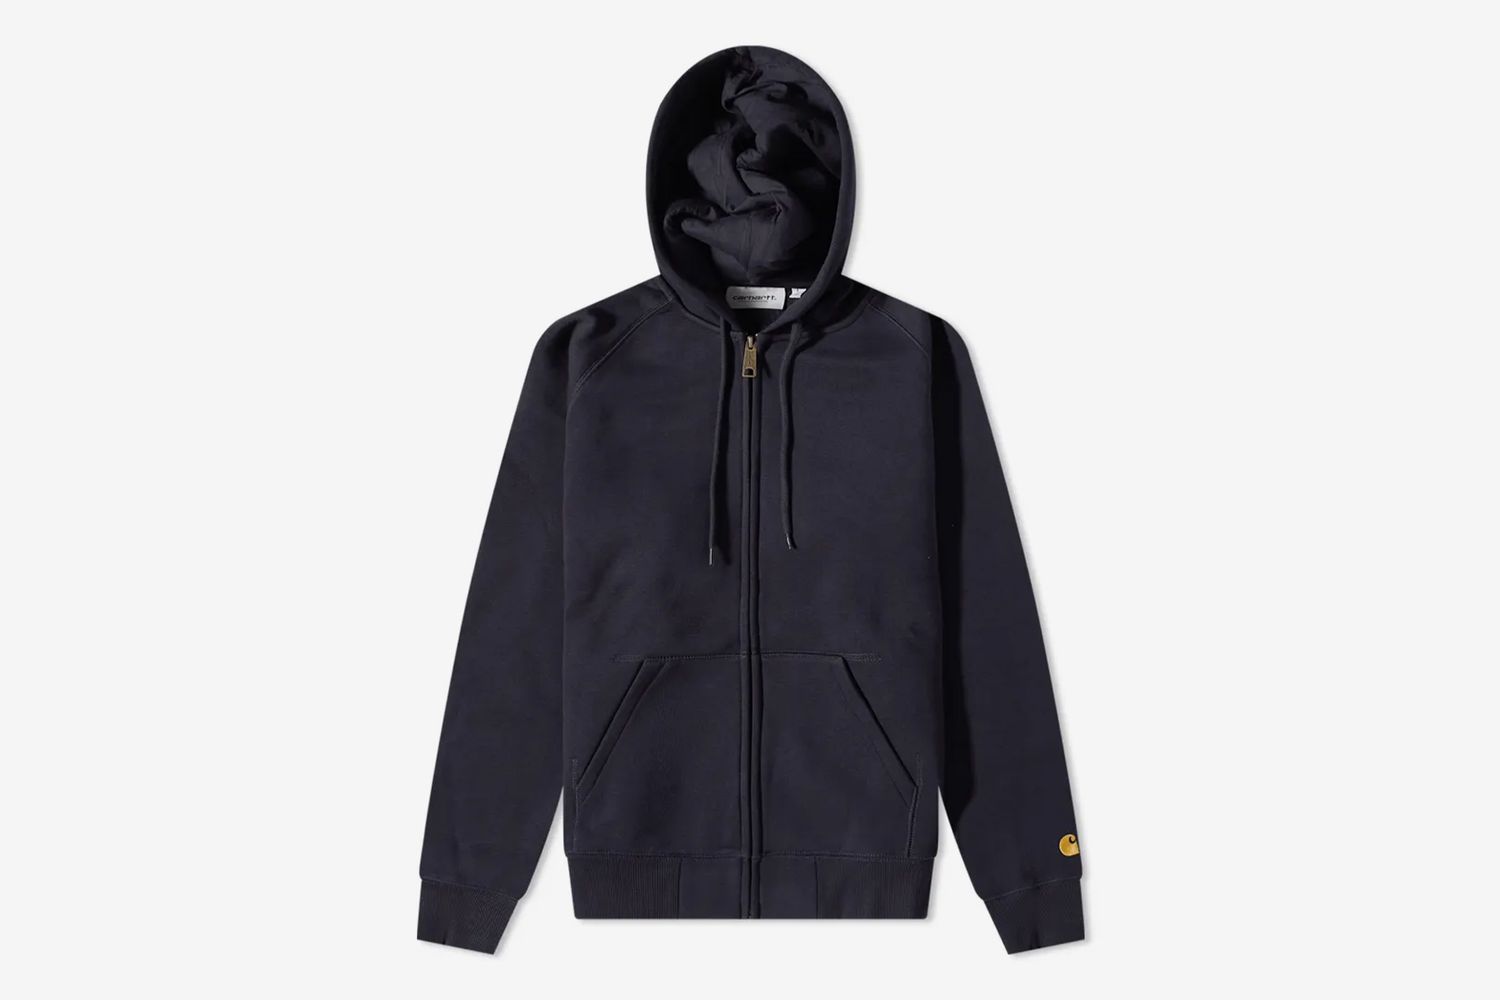 Dial in tailwind skepta You Comfort with these Zip Up Hoodies